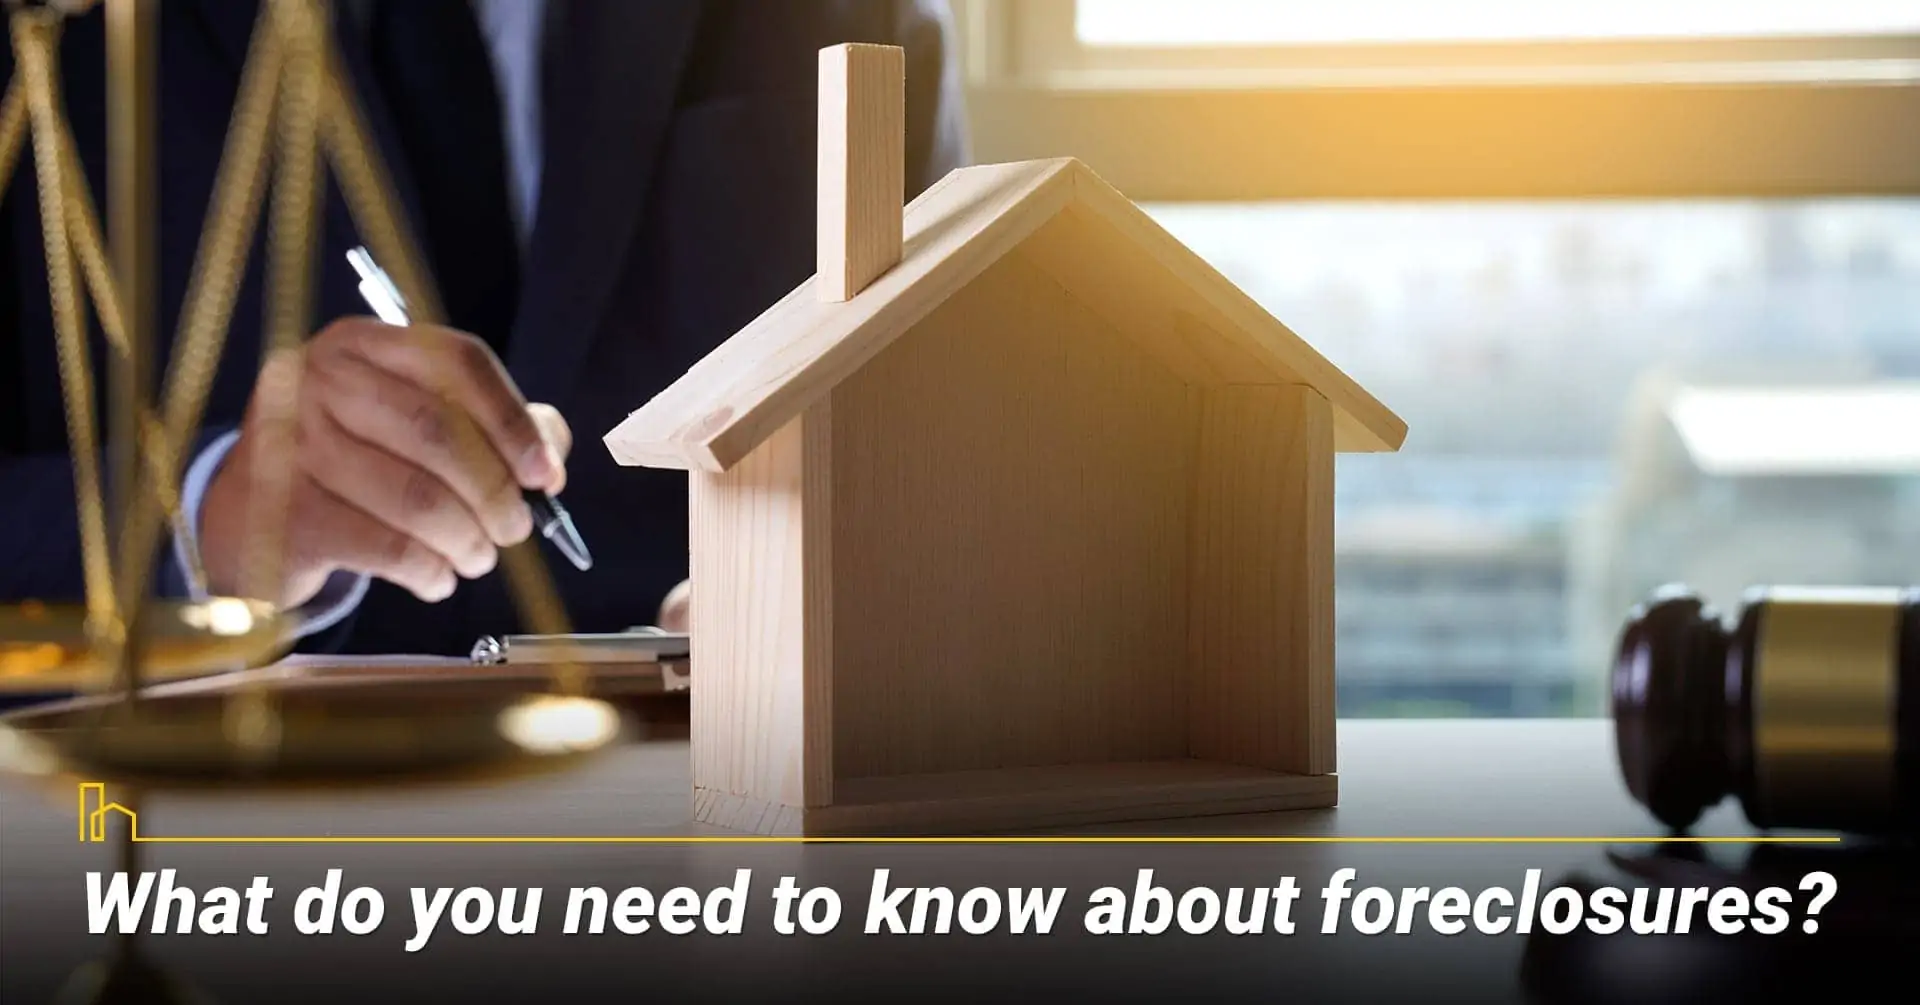 What do you need to know about foreclosures? Foreclosure is a lengthy process